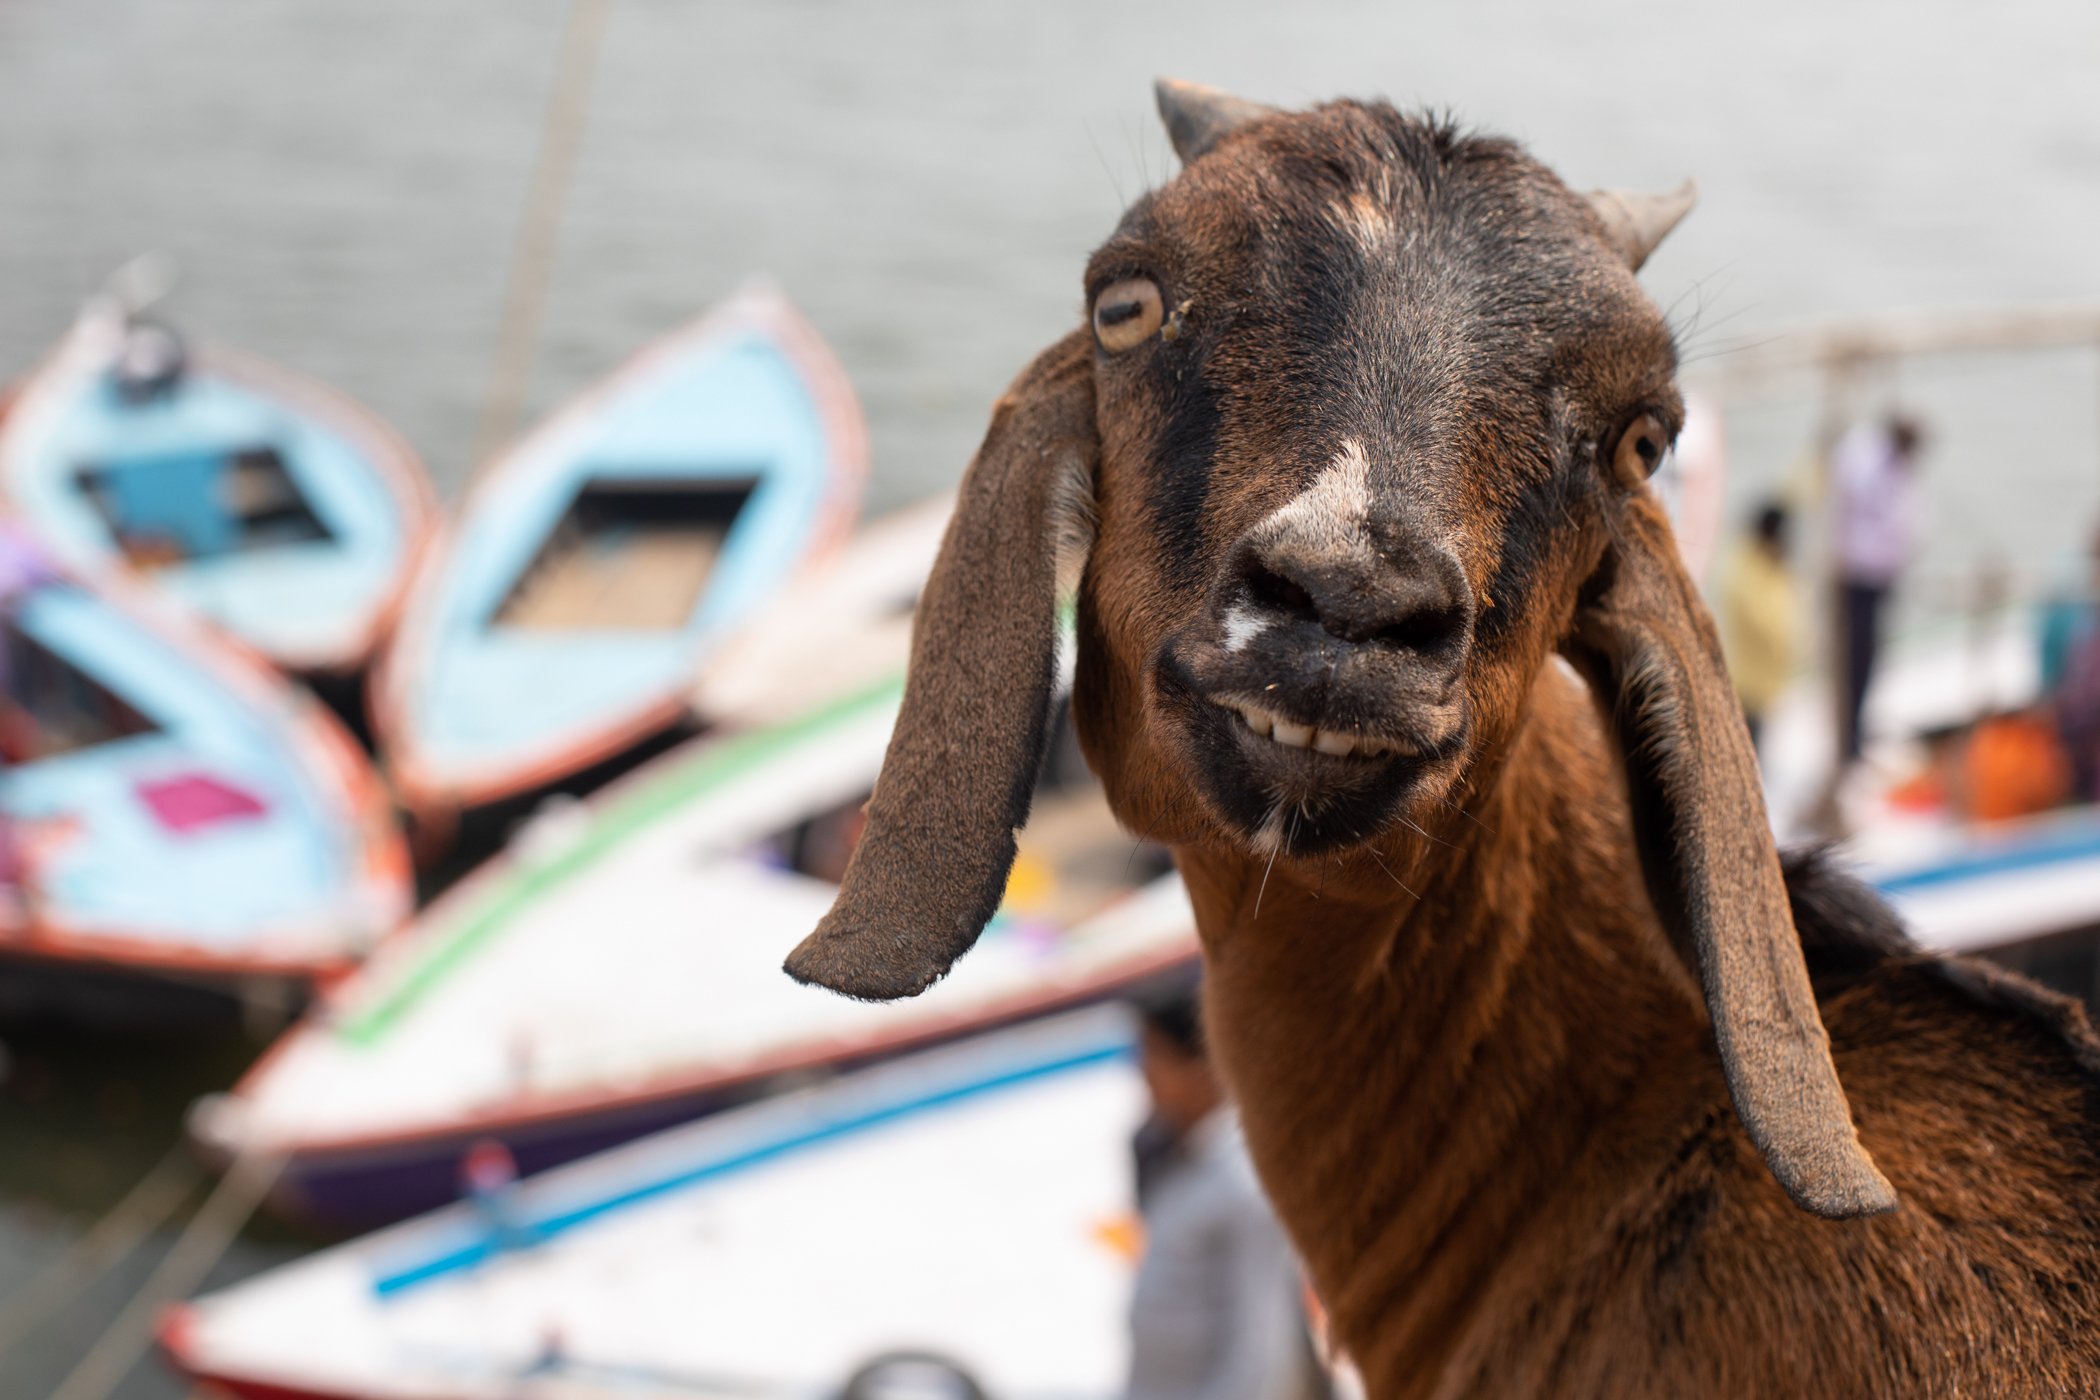 Crazy Goat on the banks of the River Ganges in Varanasi, India.